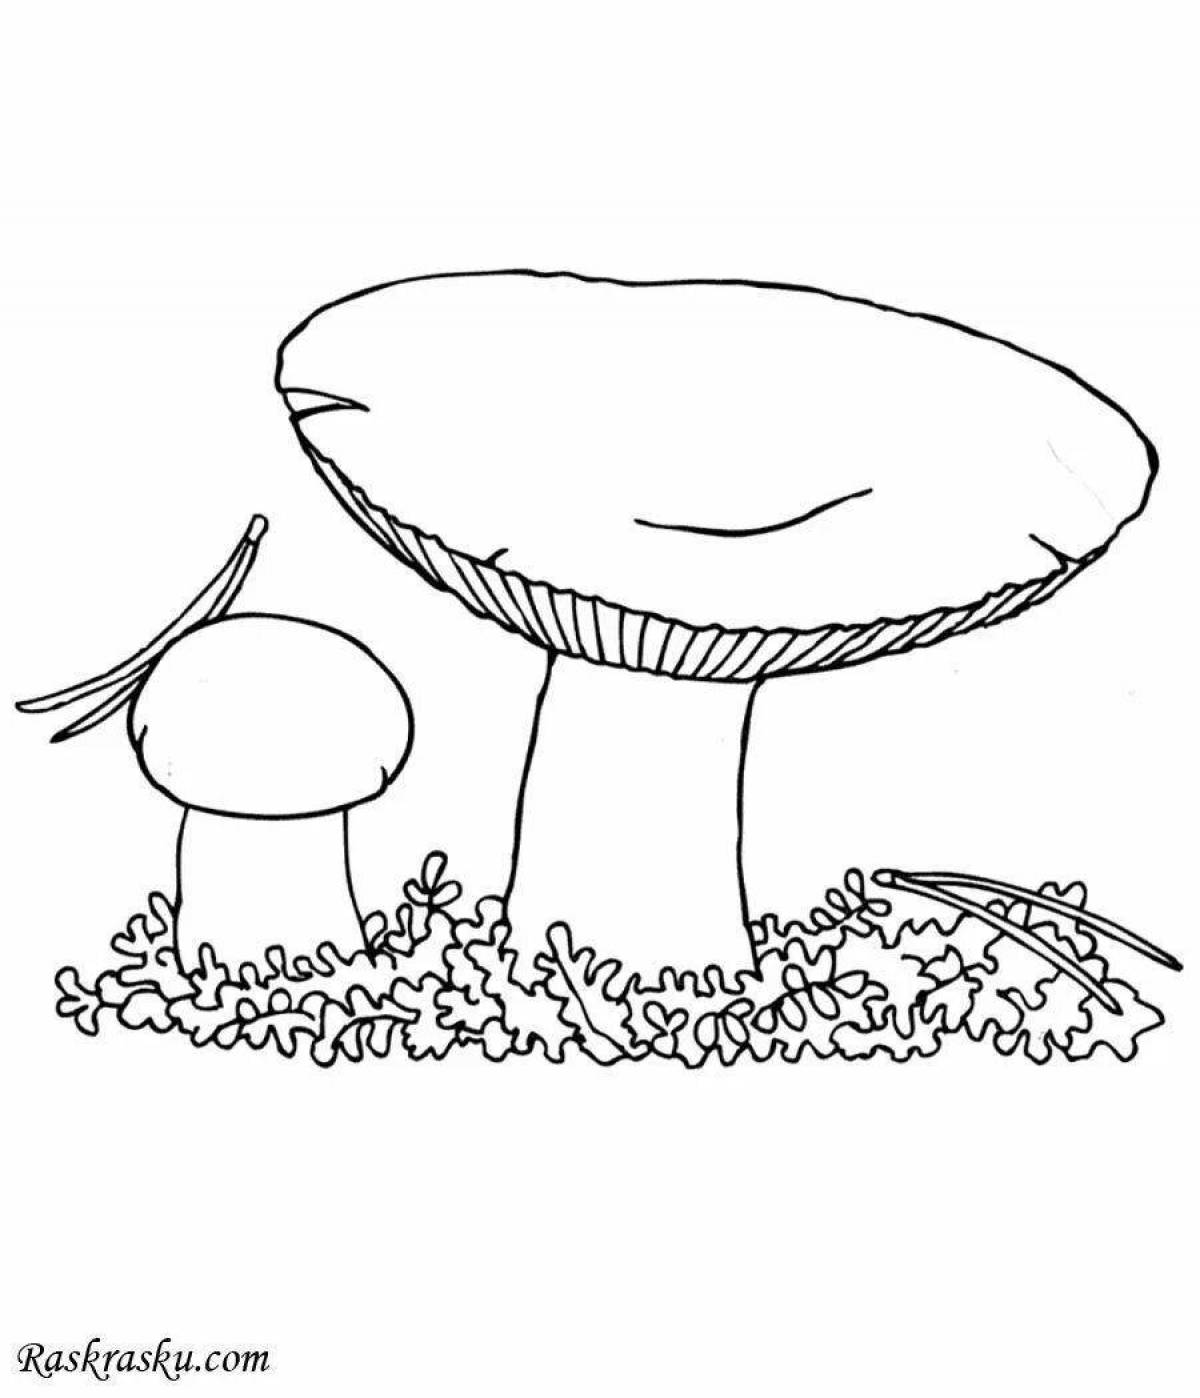 Coloring witty russula